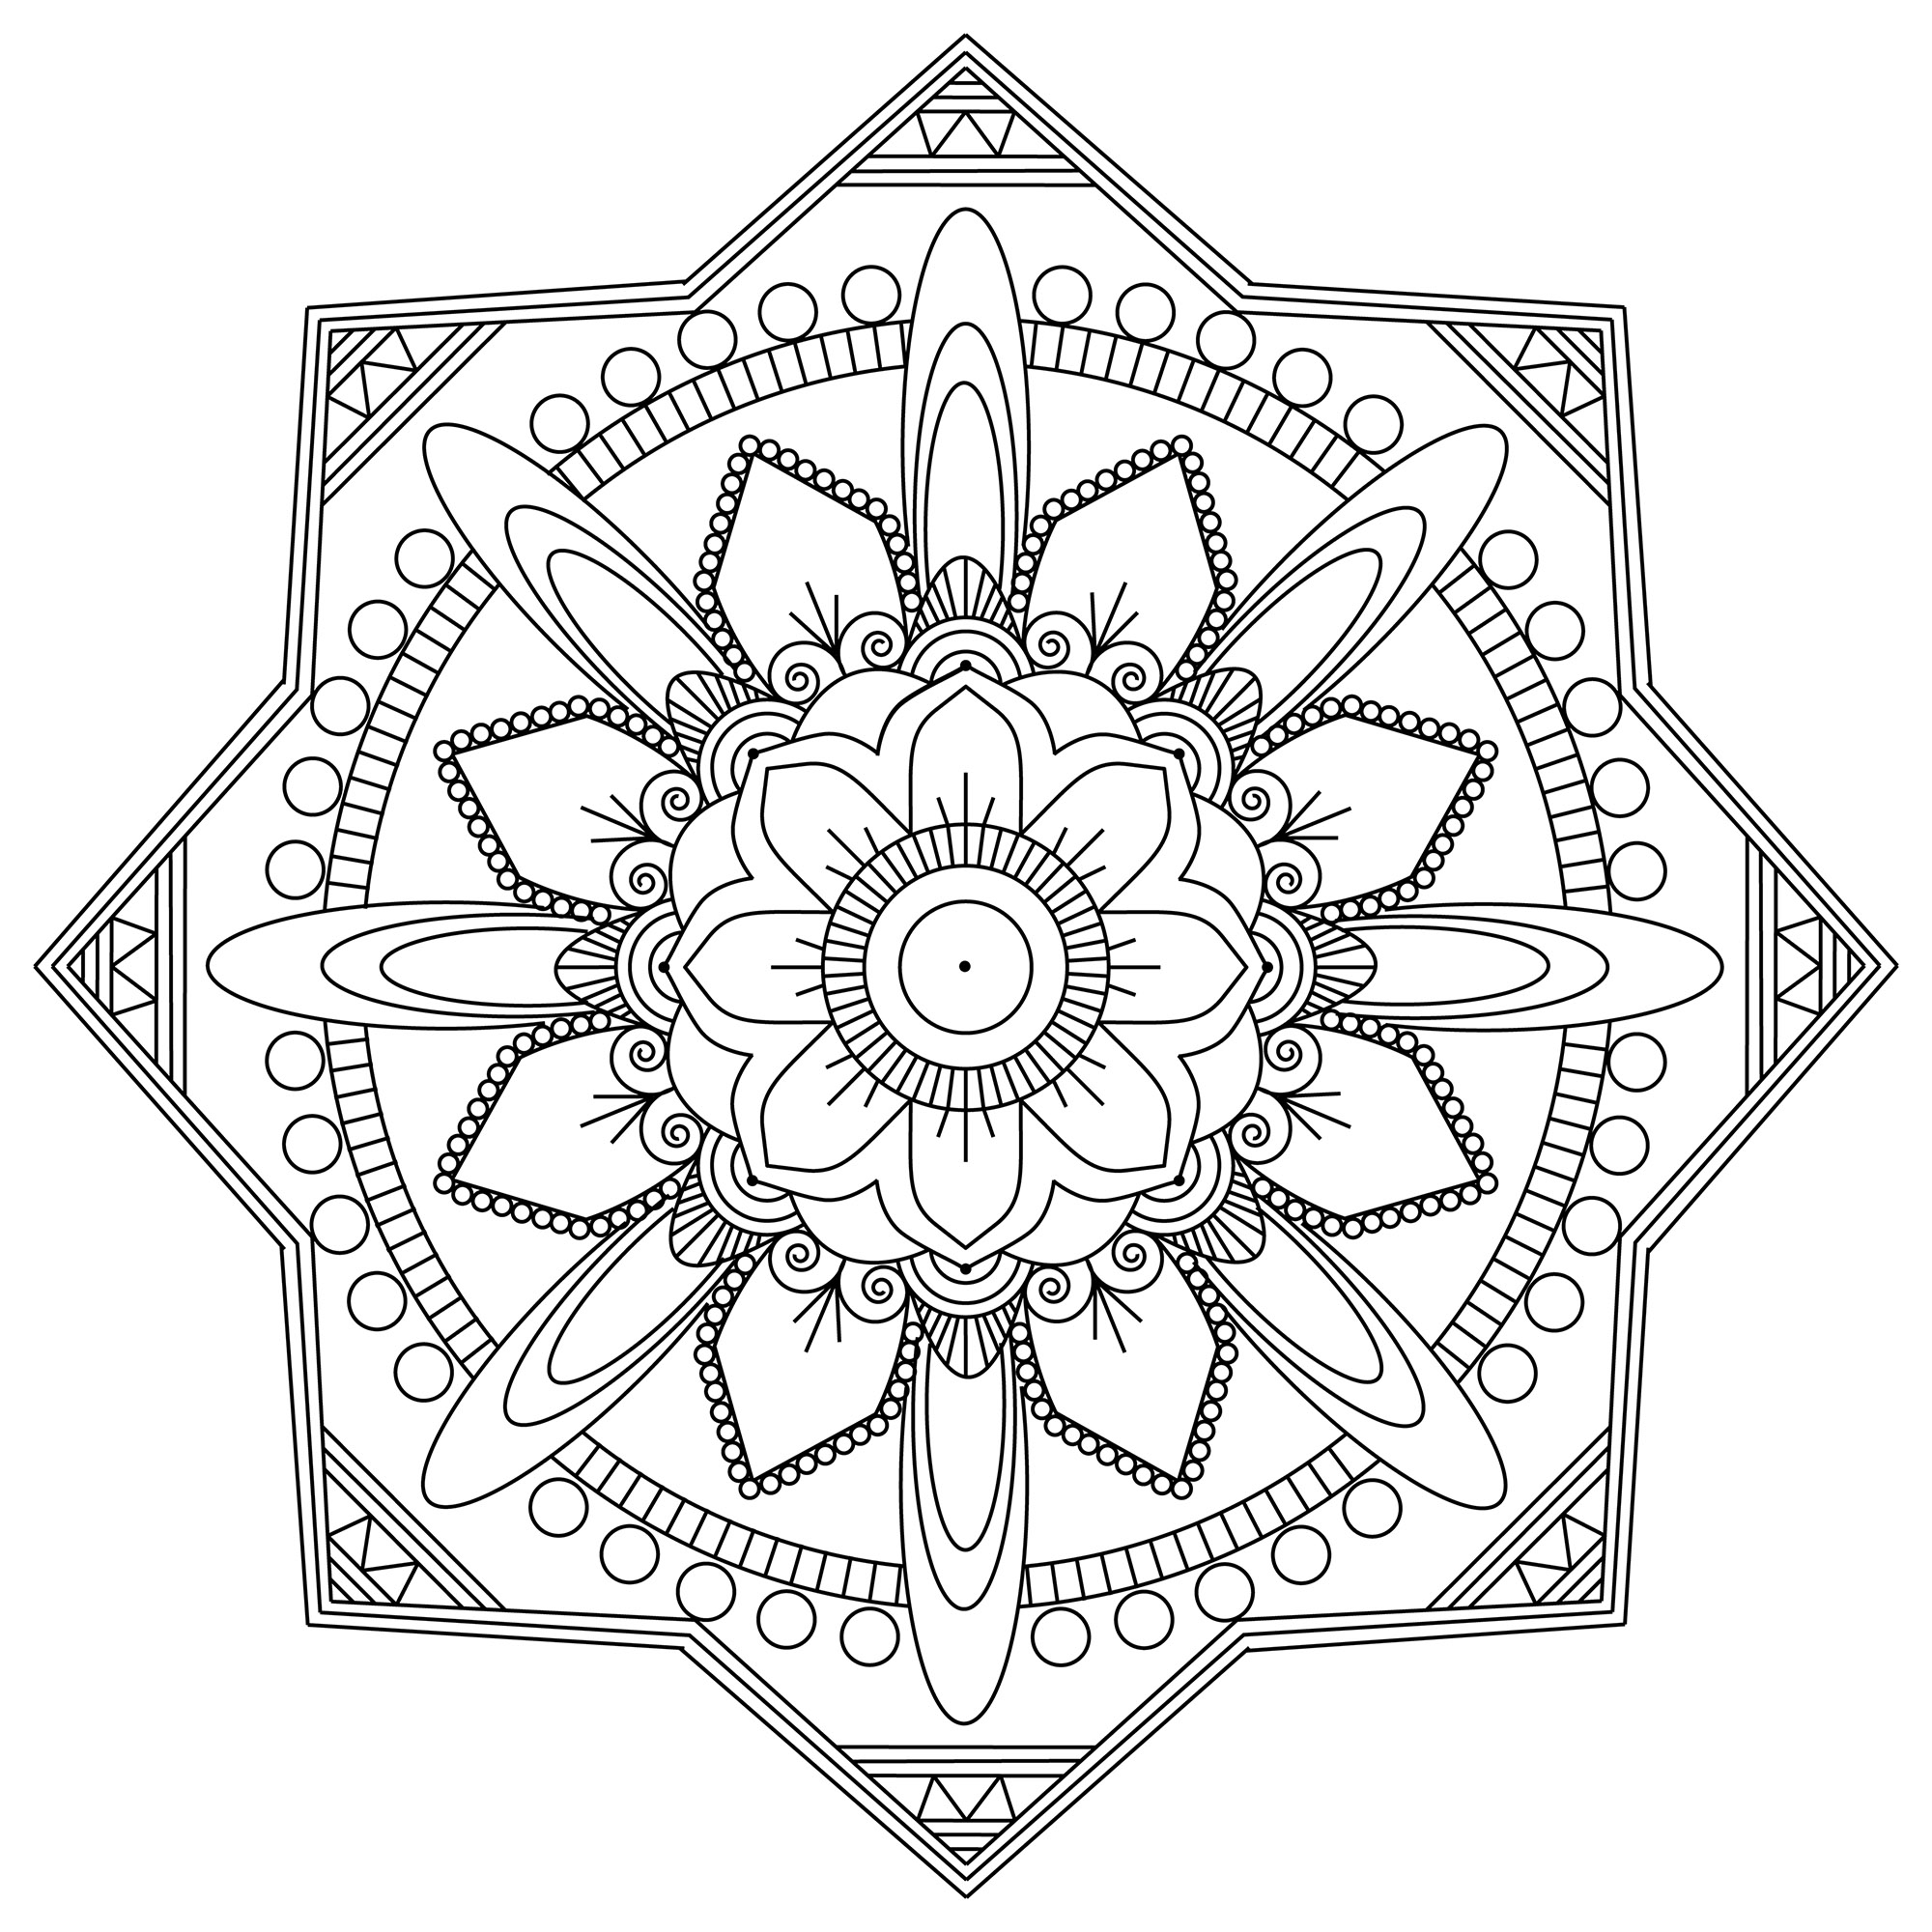 A Mandala out of the ordinary, which will allow you to spend a good time coloring, without complicating your life with too little areas, if it's not what you search for.